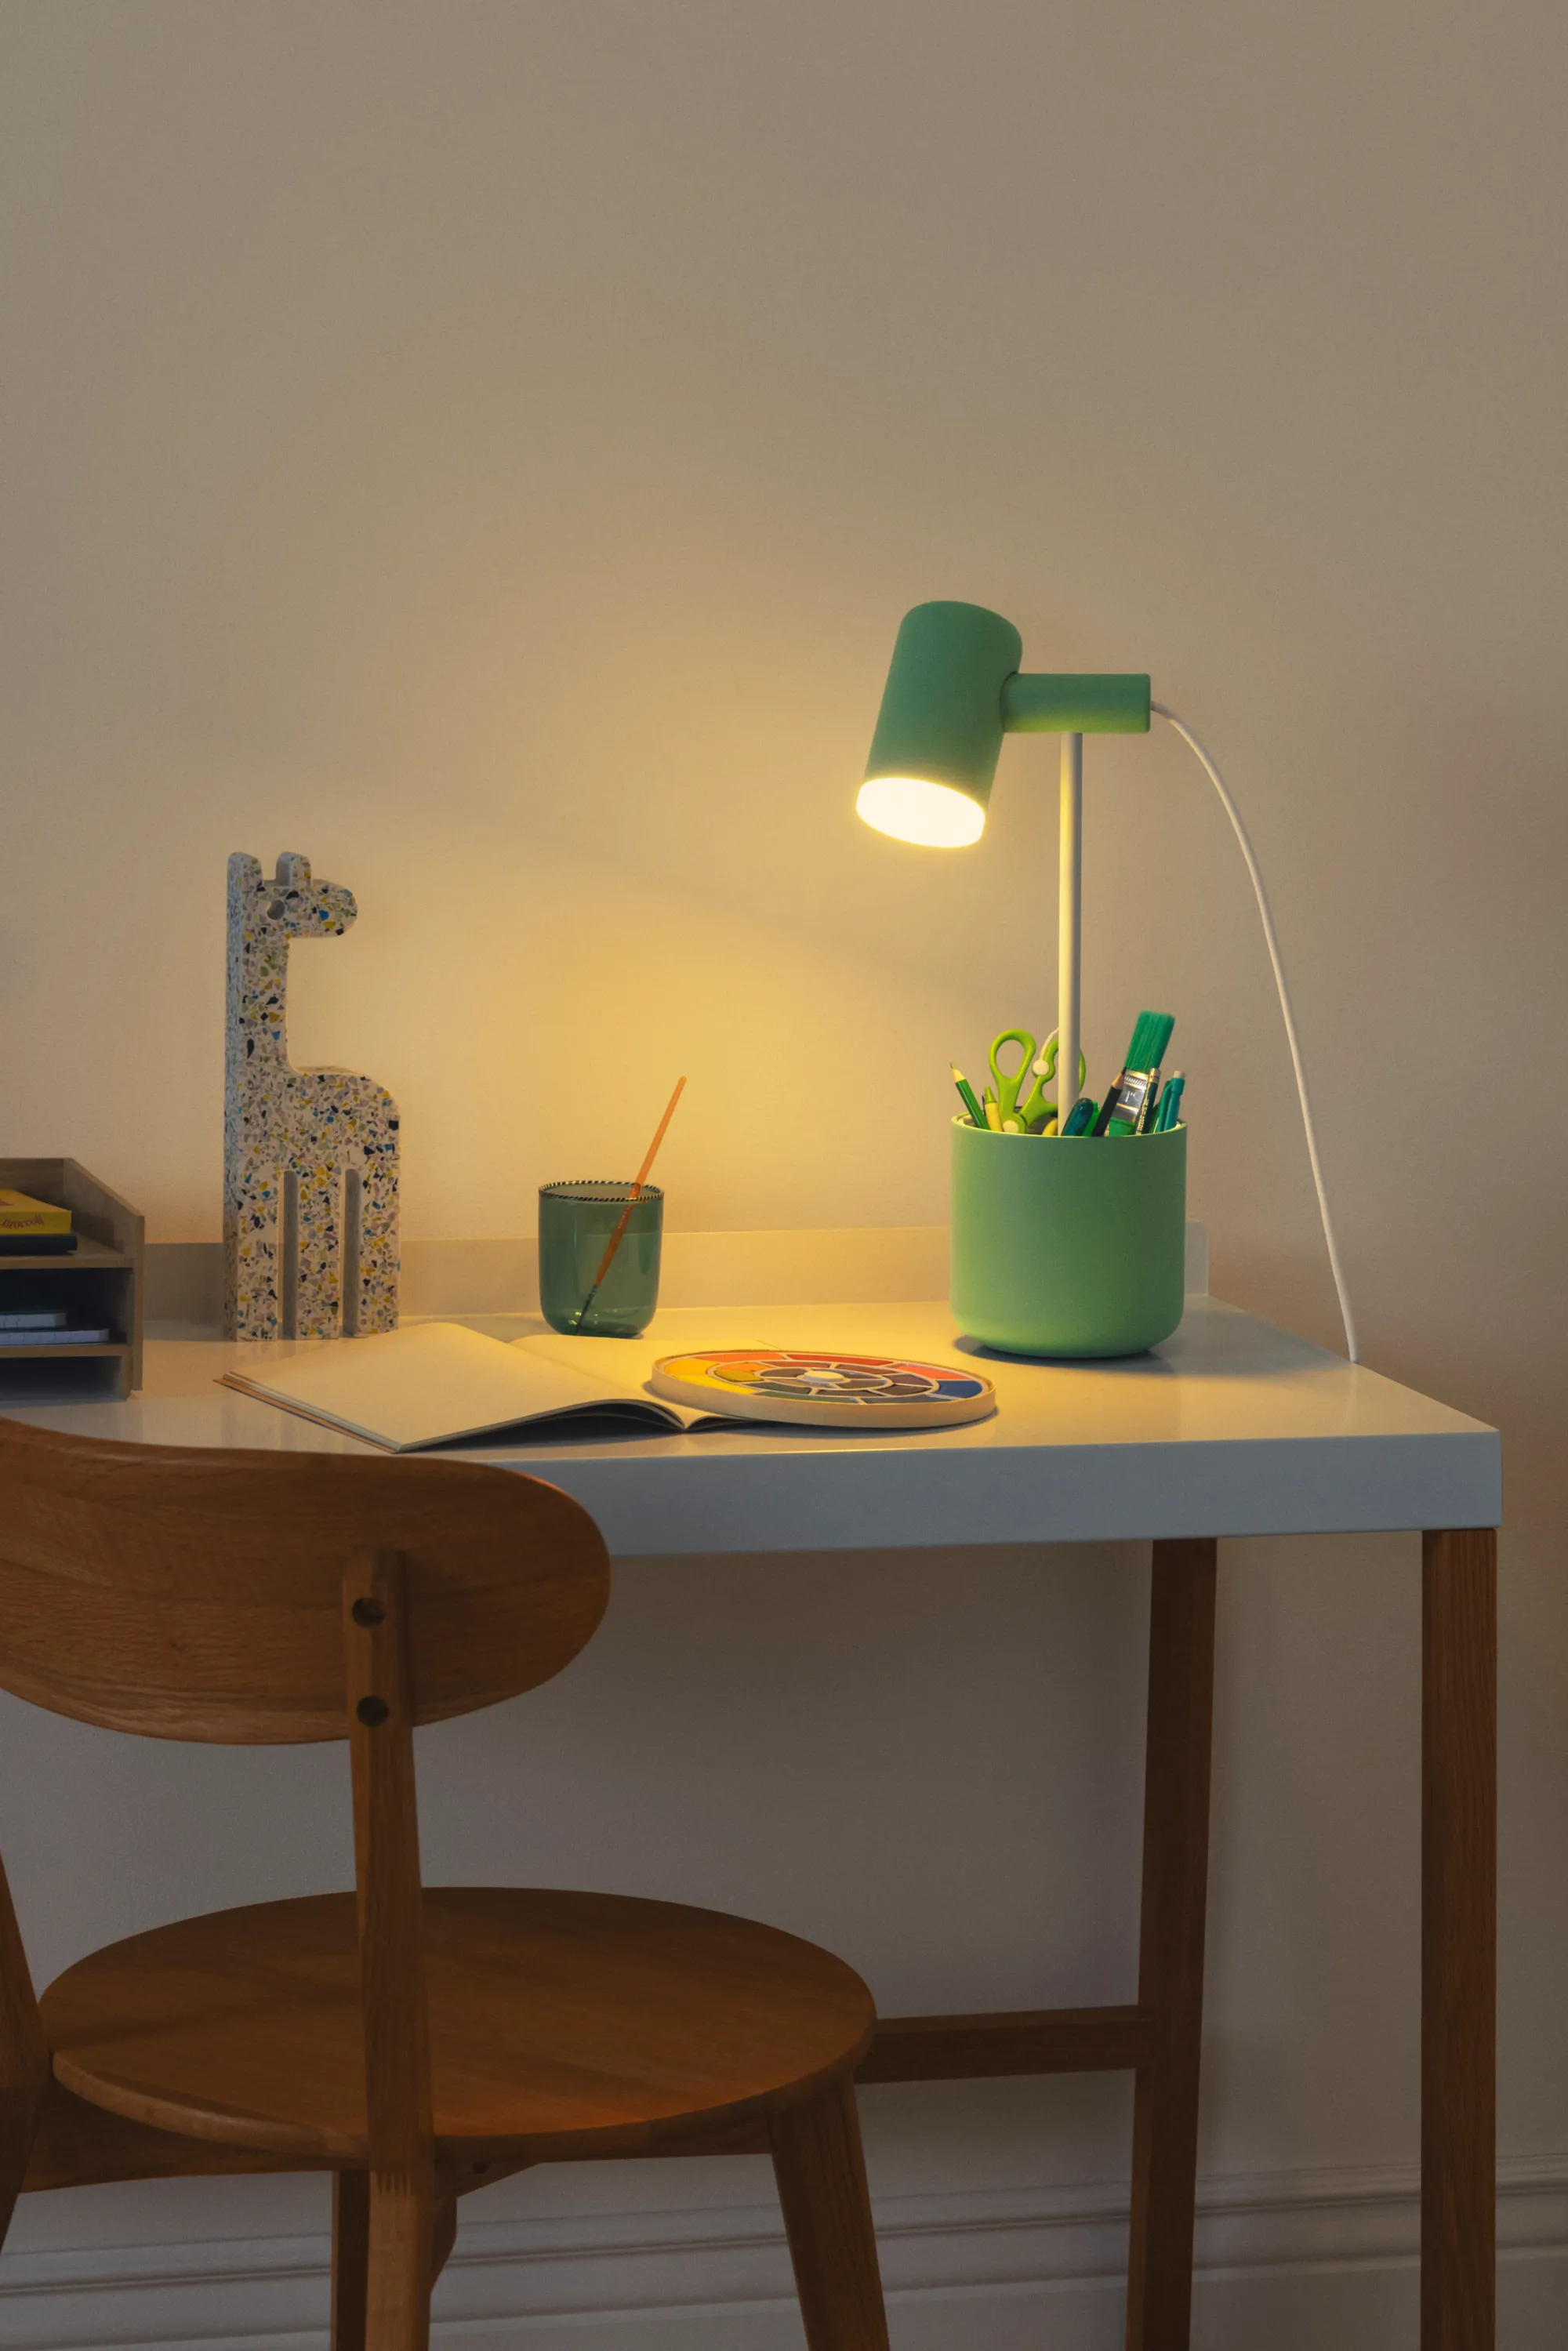 A table with watercolor materials is illuminated by Gantri’s Field Trip Table Light in sage green. The multi-purpose lamp also functions as a penholder for several writing materials and a pair of scissors.